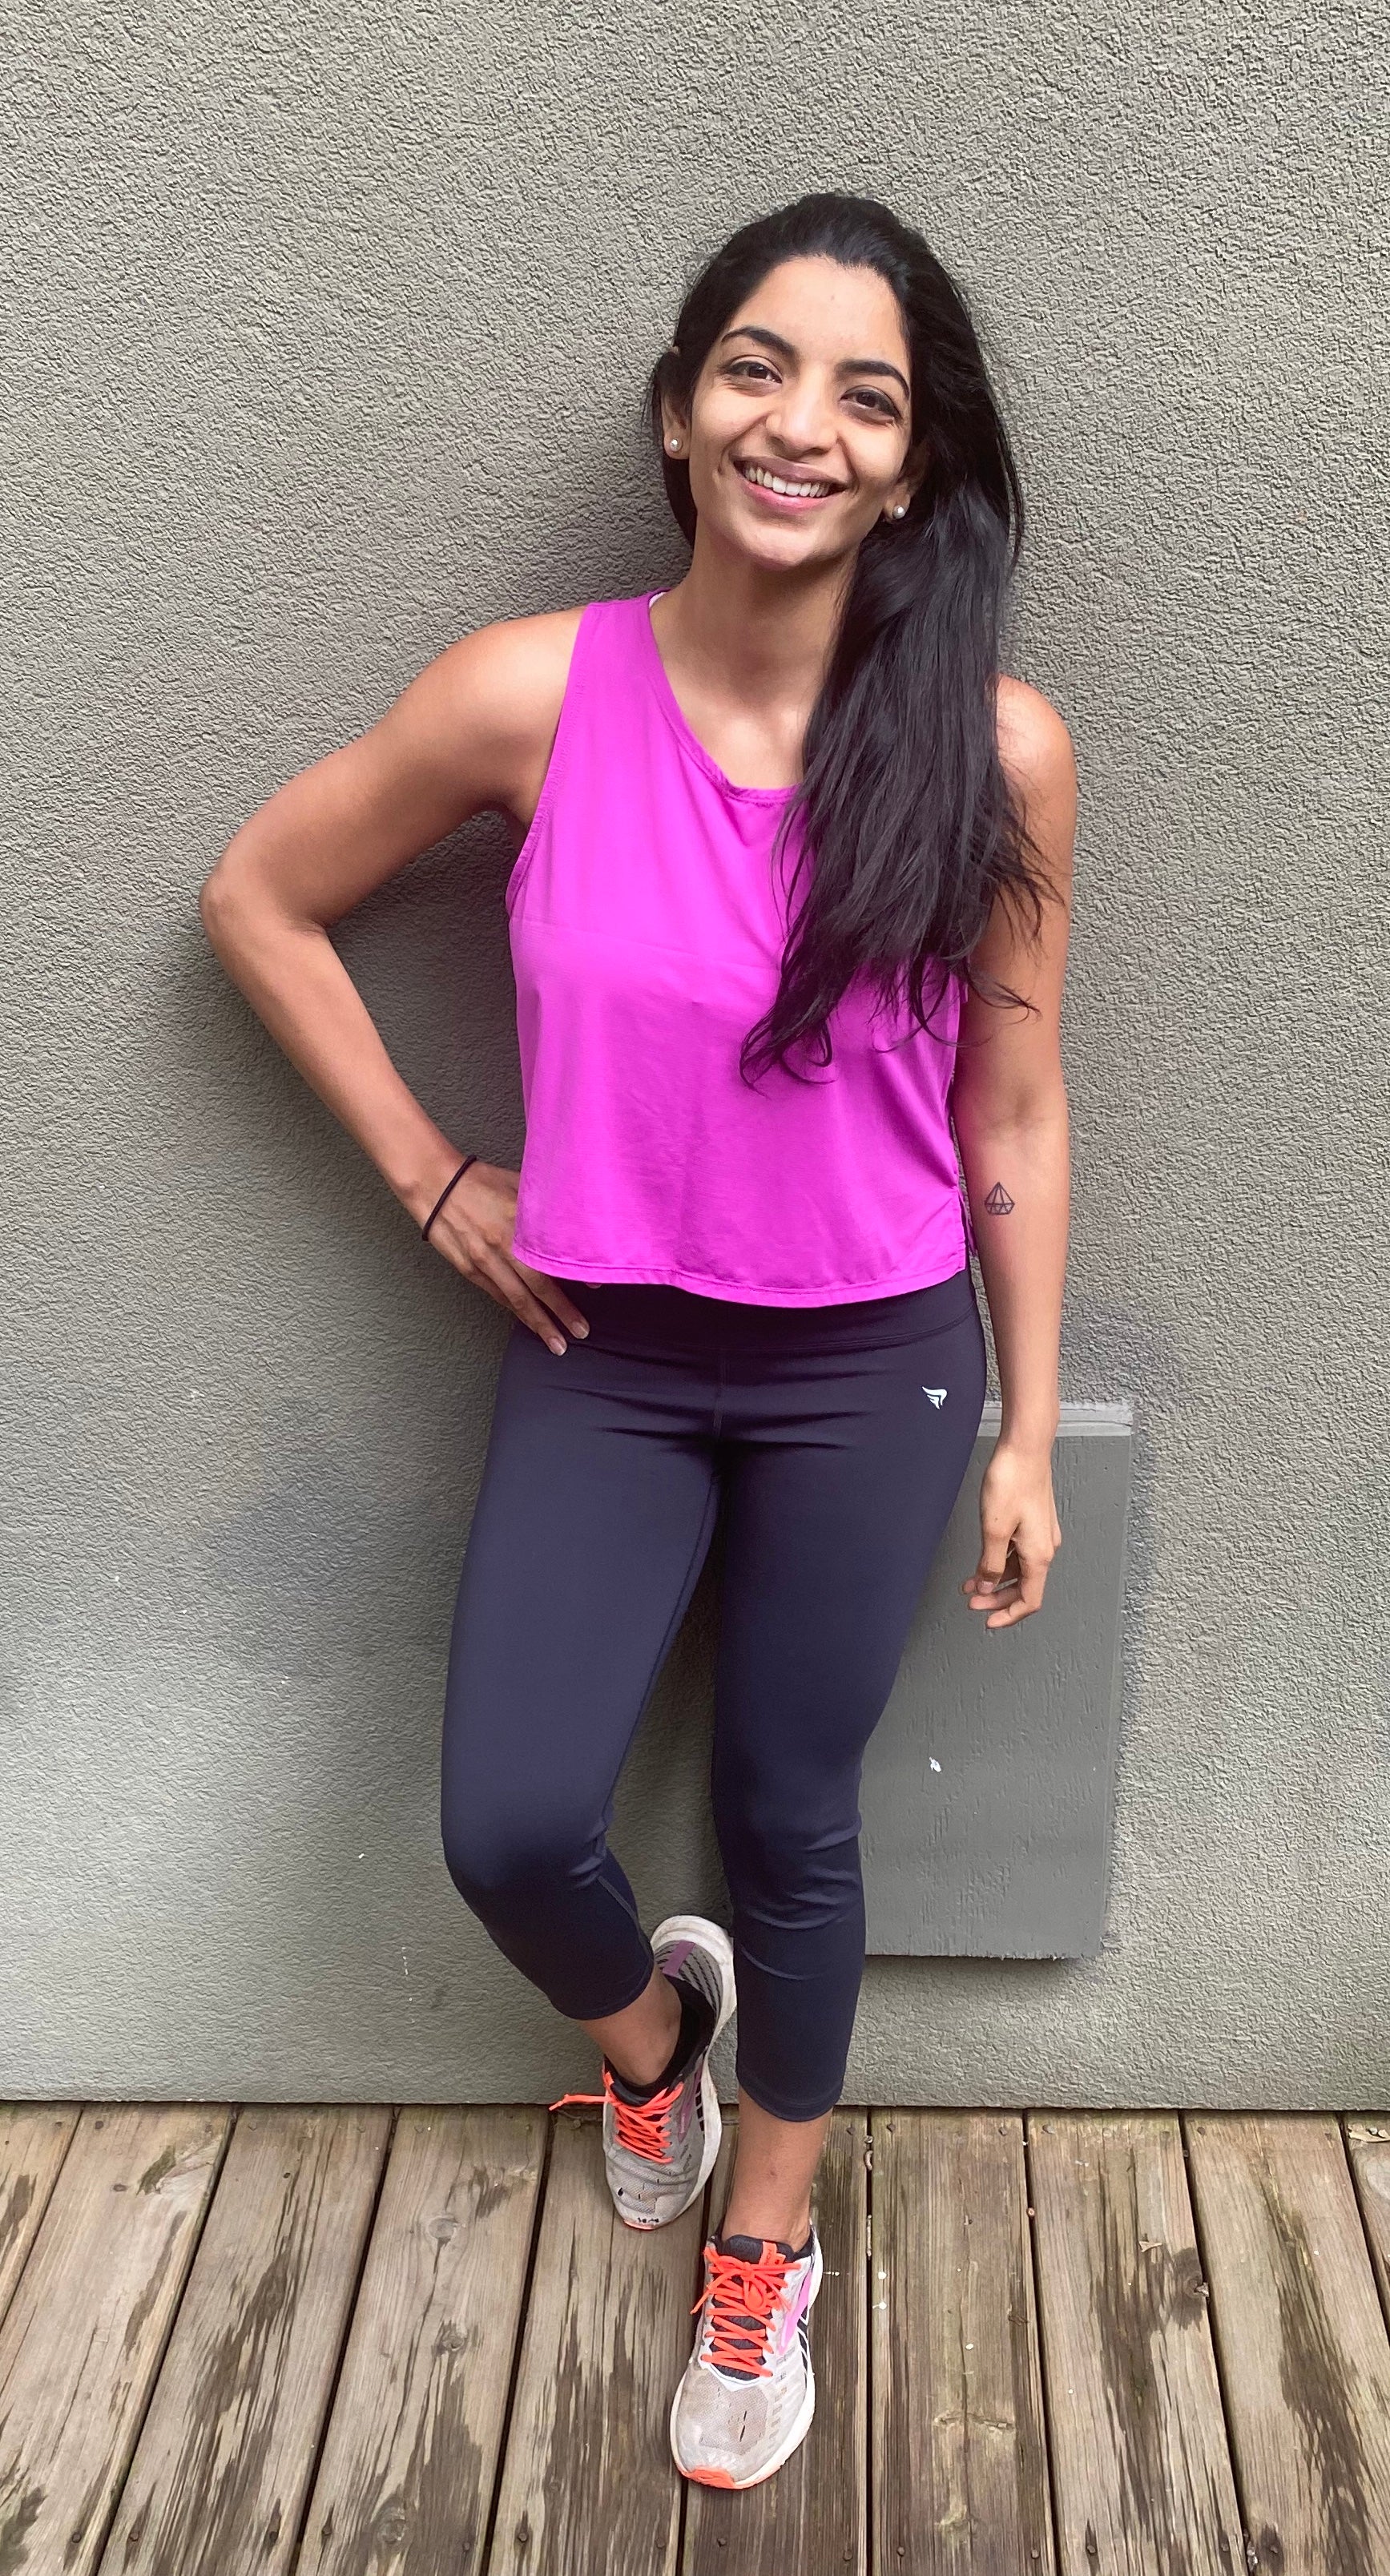 The Boss Body Revolution – Perspective Fitwear